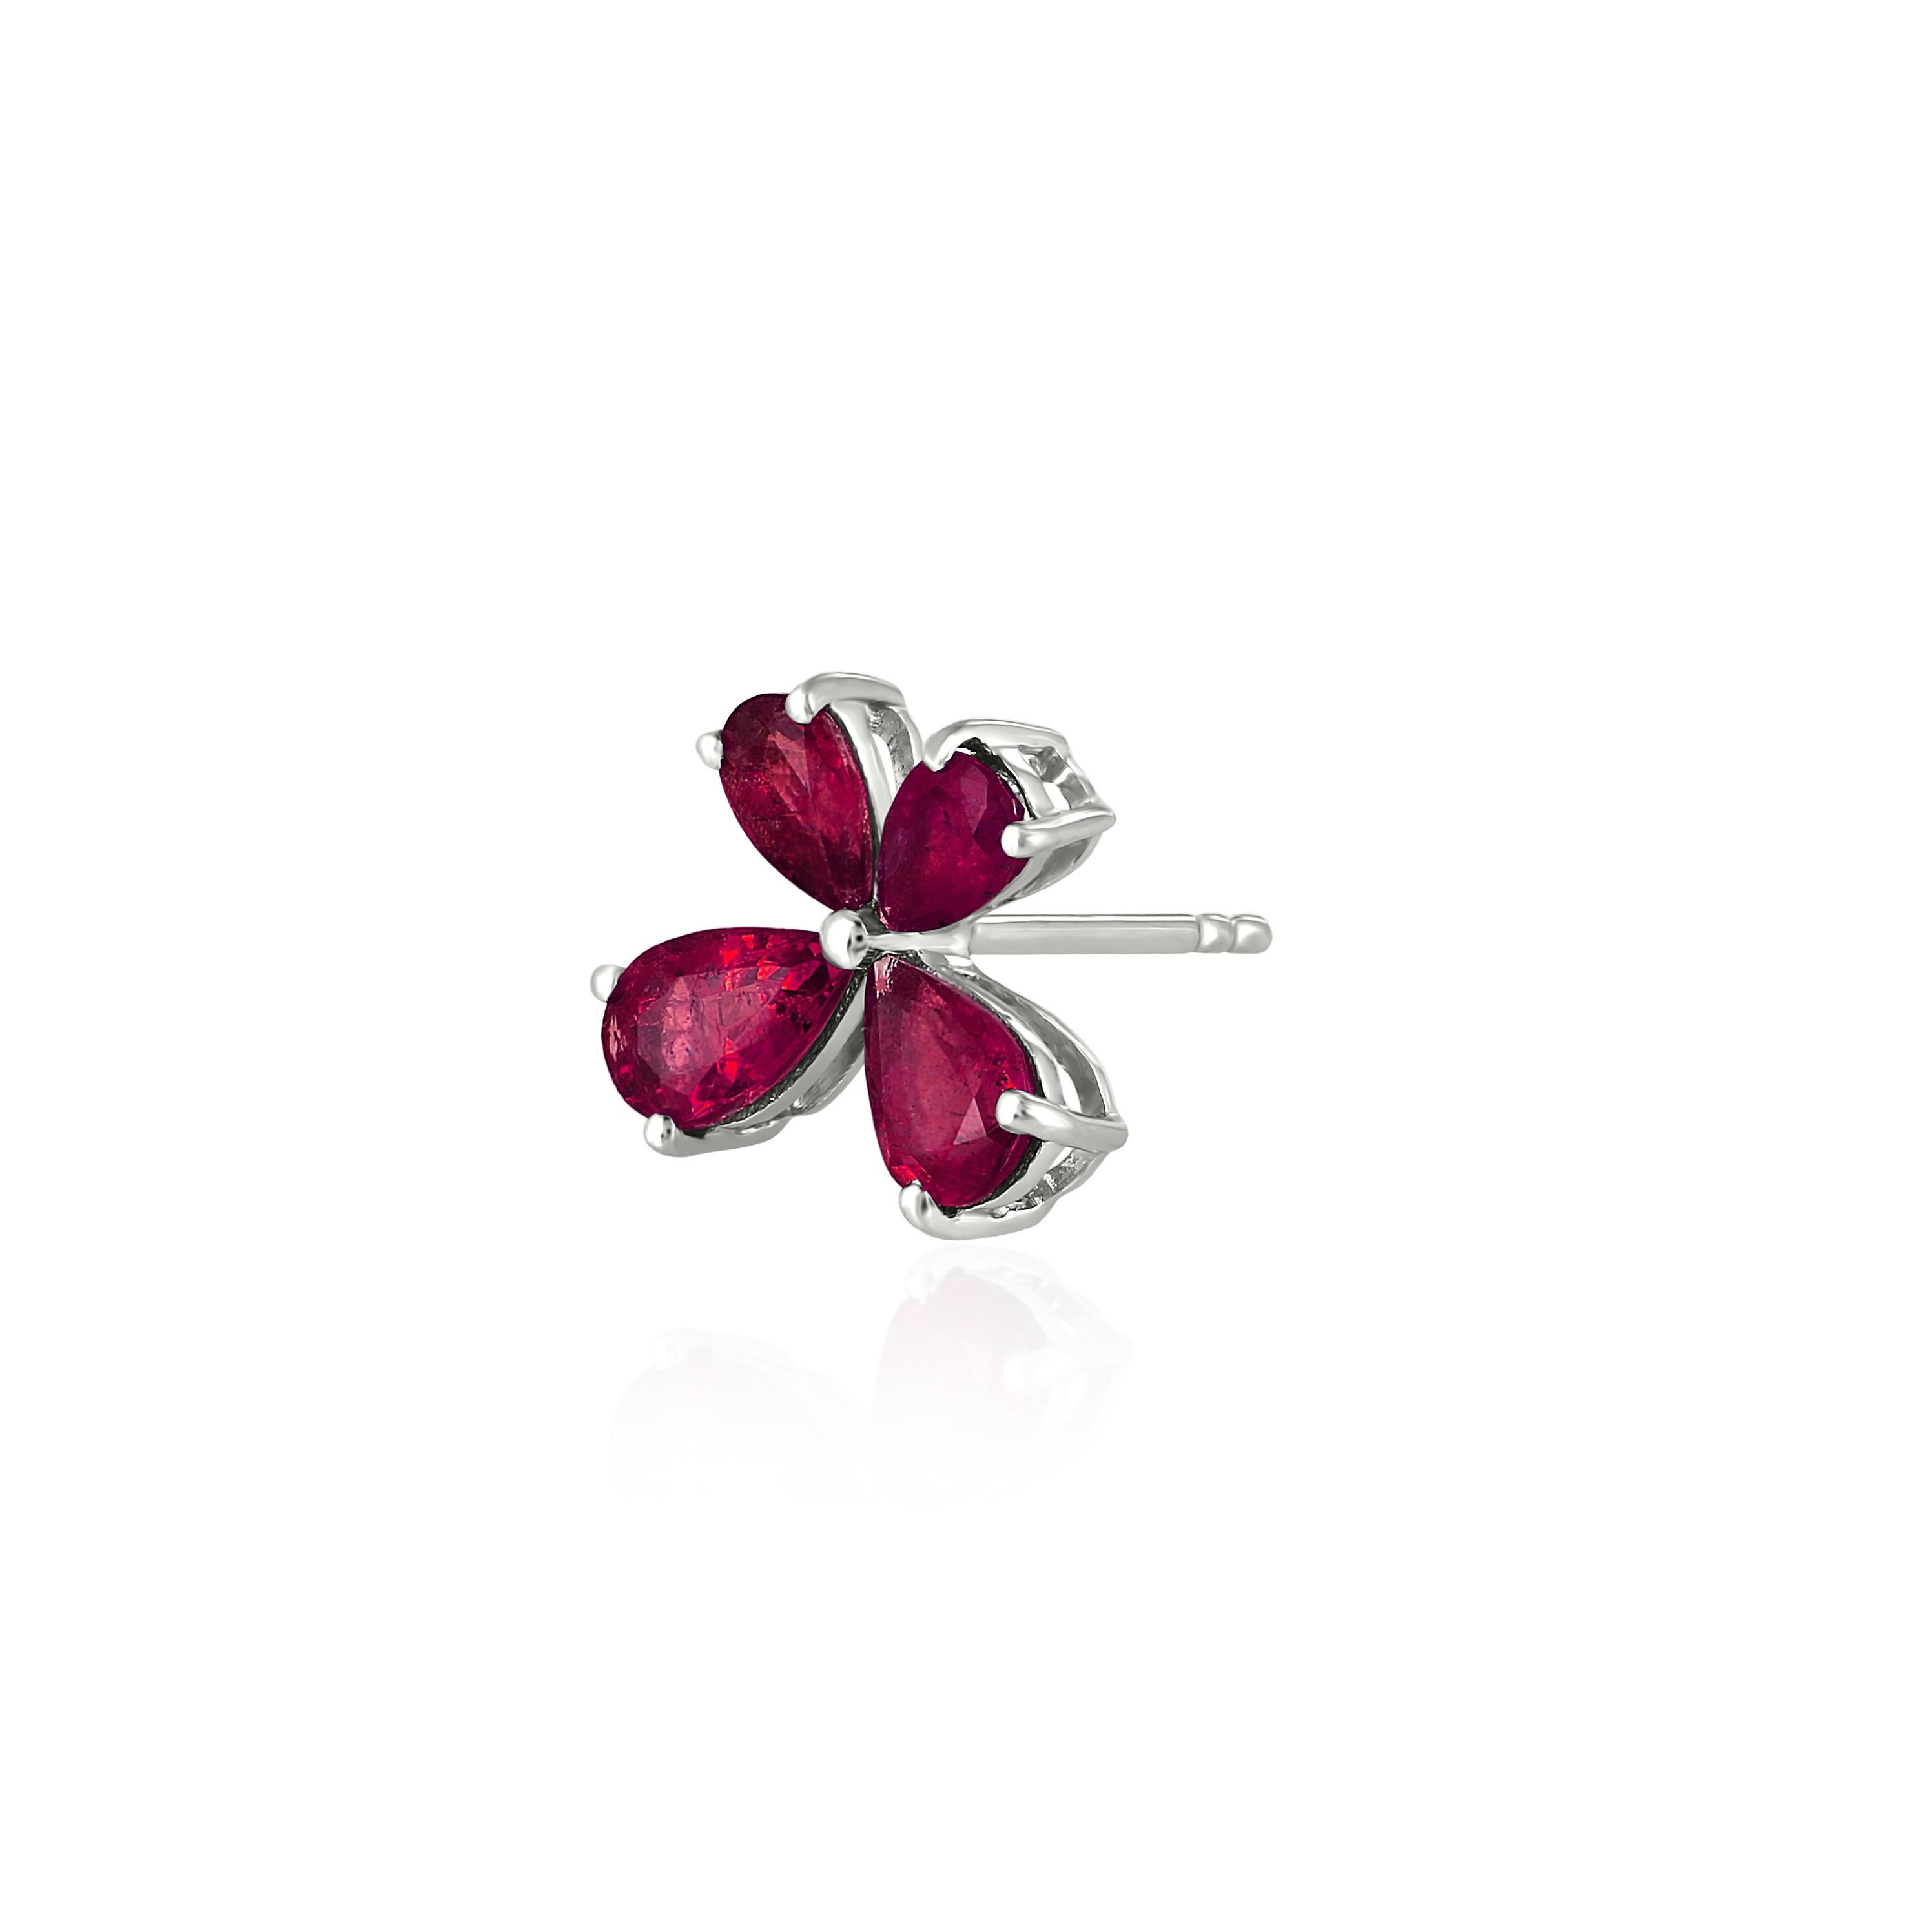 Contemporary Gemistry 2.45 Cttw. Pear Shaped Ruby Floral Stud Earrings in 18k White Gold For Sale